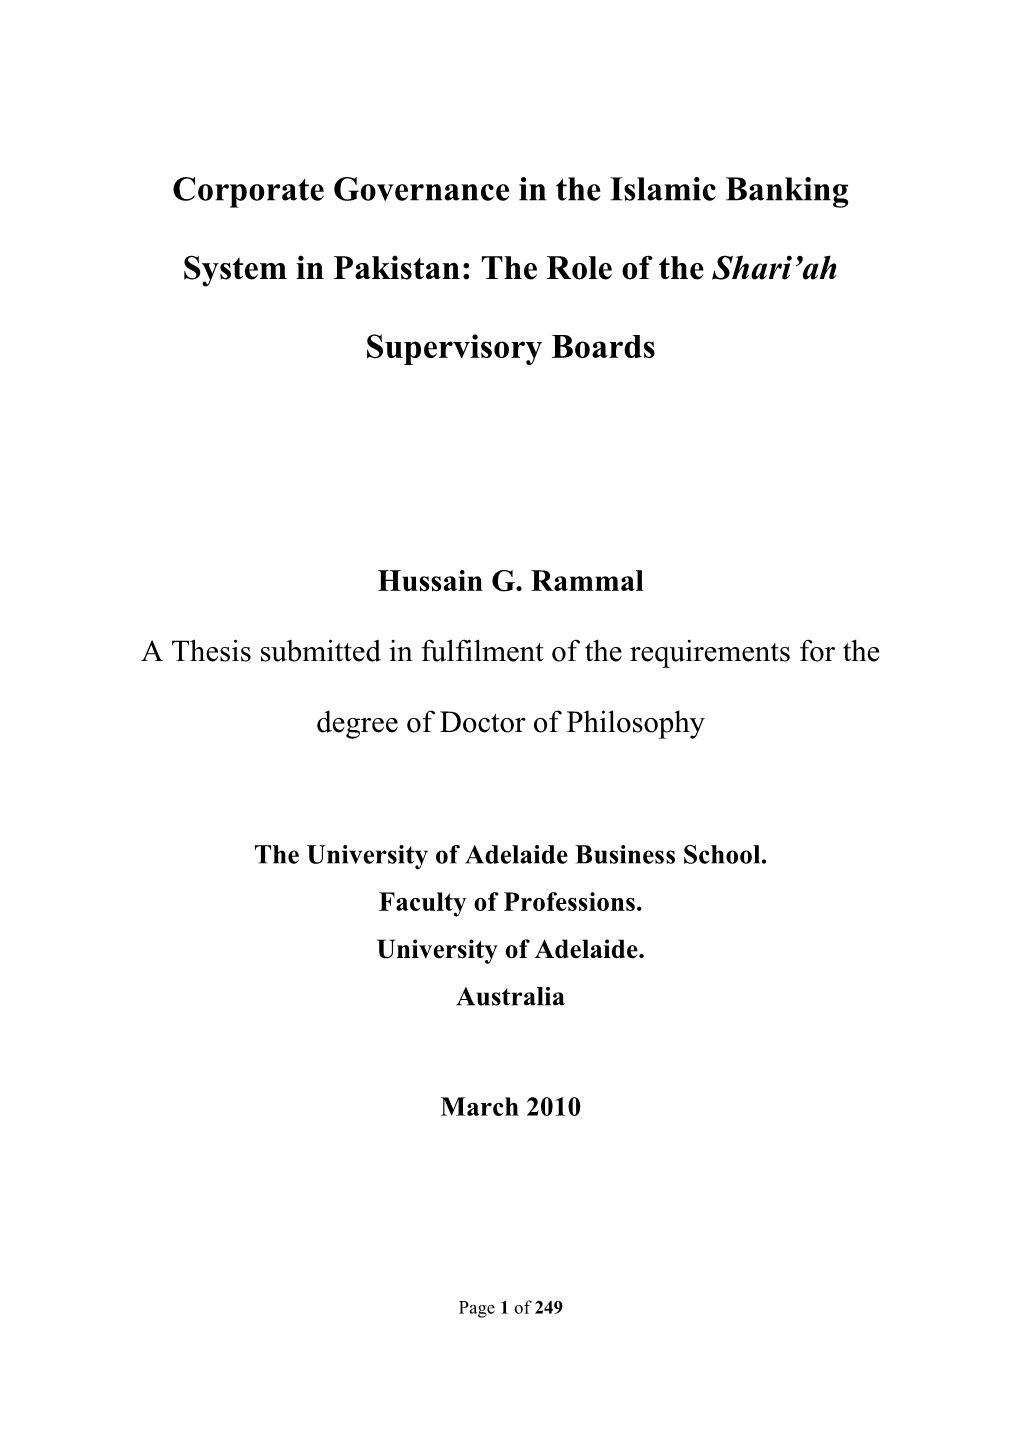 Corporate Governance in the Islamic Banking System in Pakistan